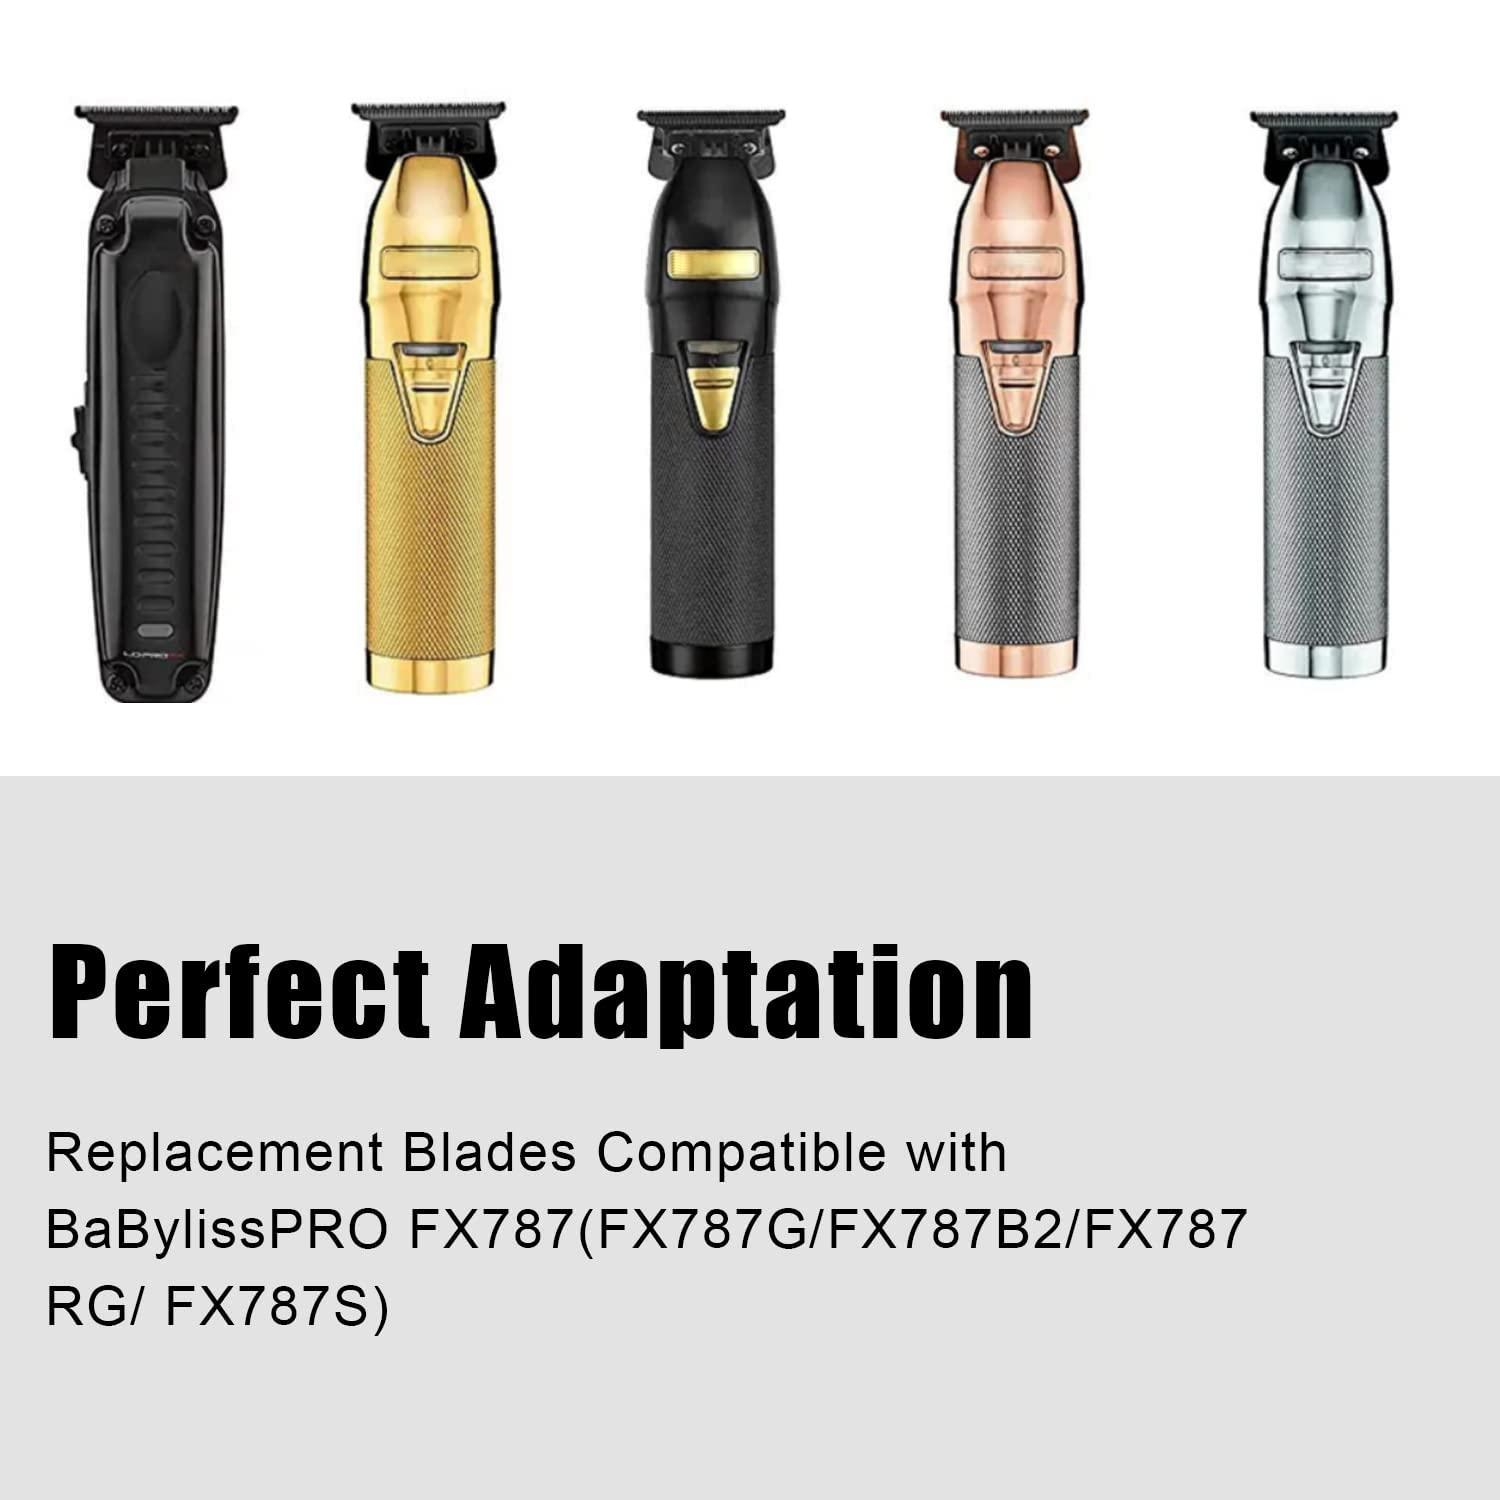 BaByliss ProFX Skeleton Hair Trimmers in 6 Color Options Item # FX787